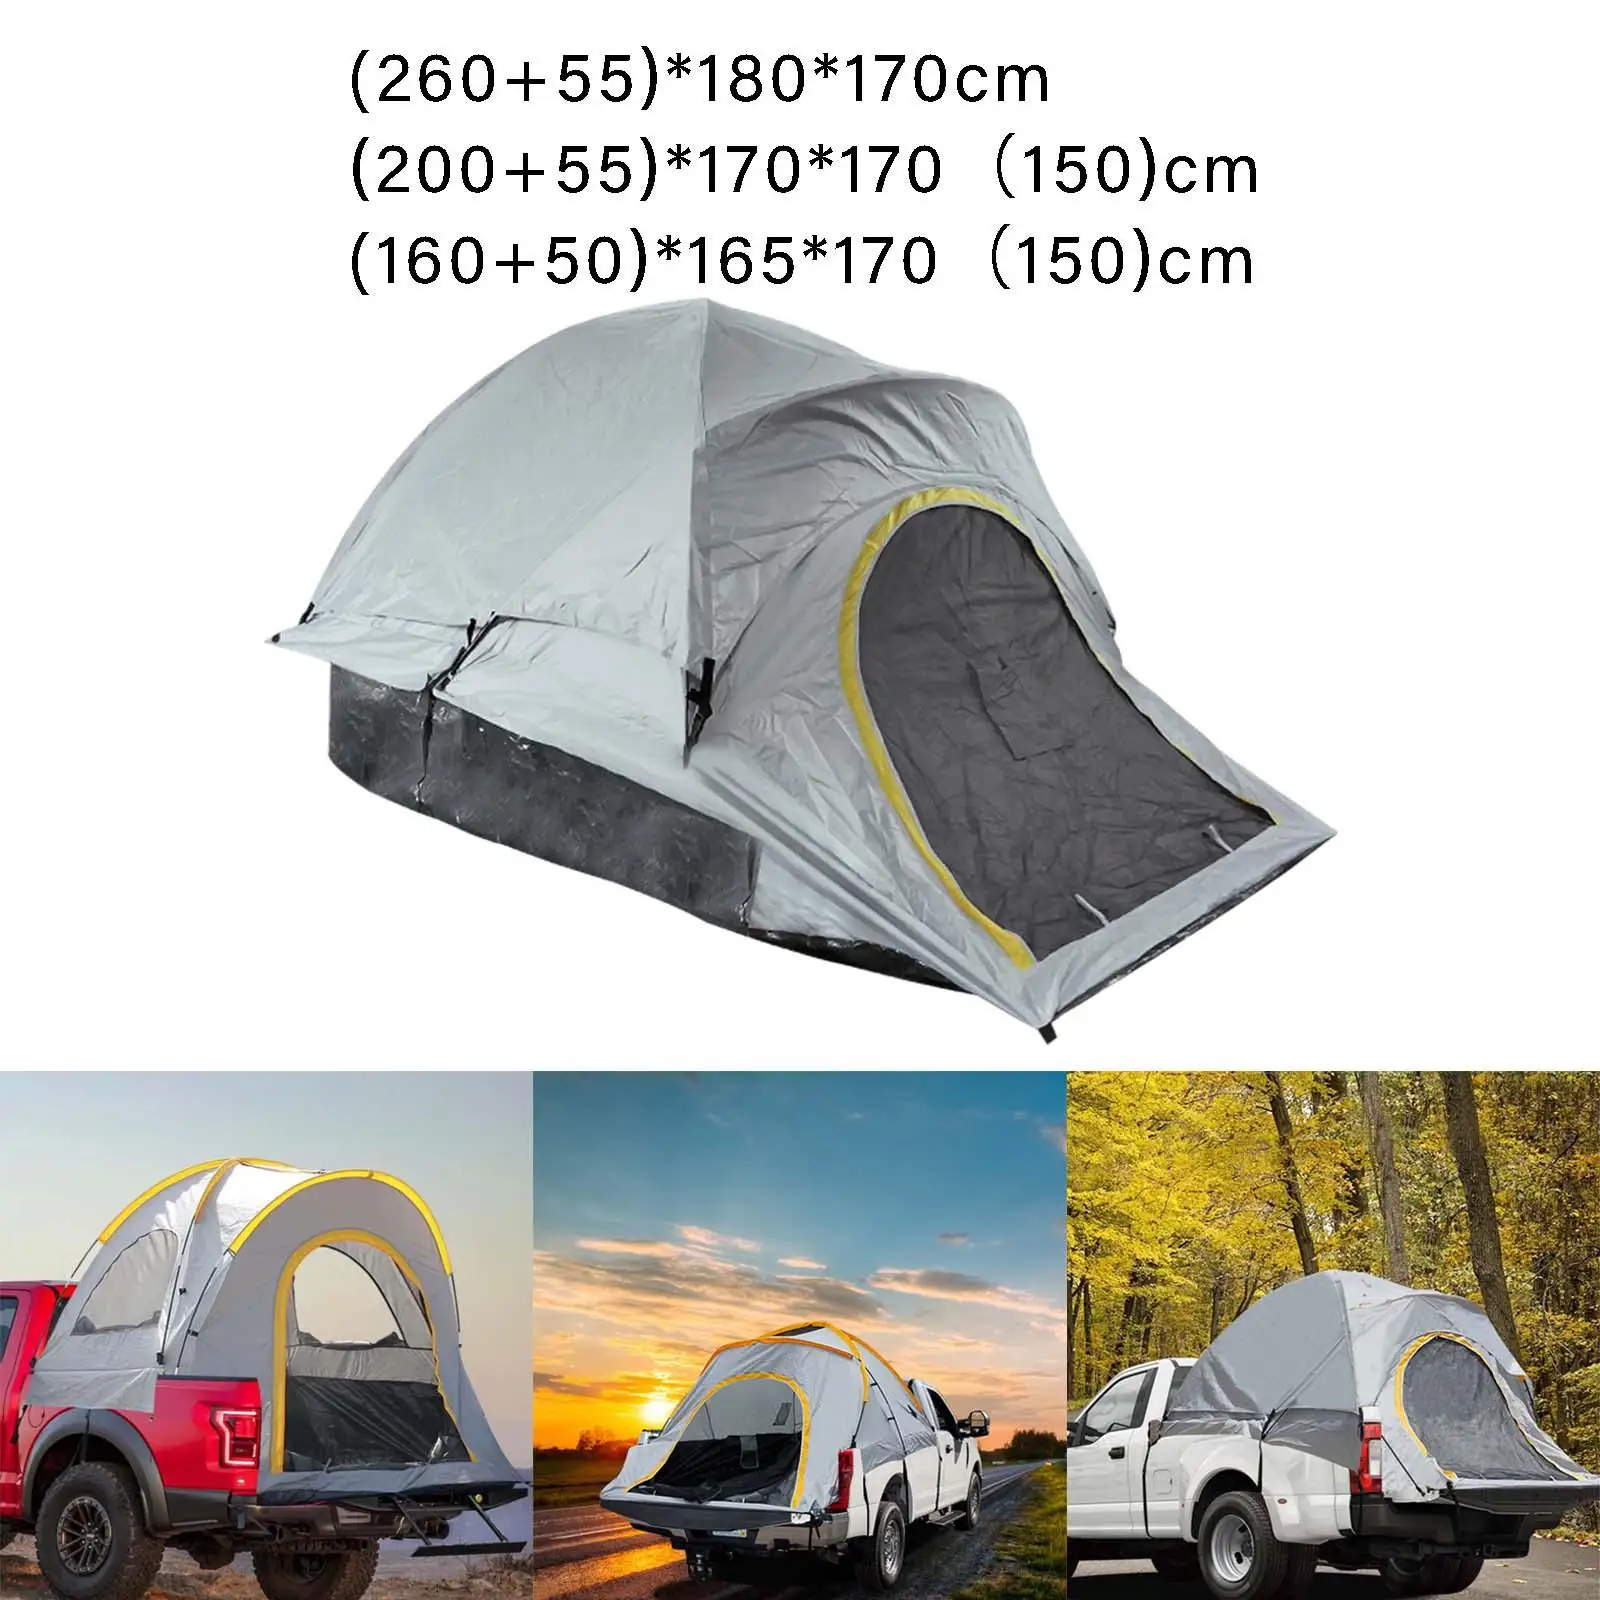 Pickup Truck Bed Tent Waterproof Shade Awning Shelter Canopy 3-4 Person for SUV Fishing Barbecue Beach Outdoor Camping